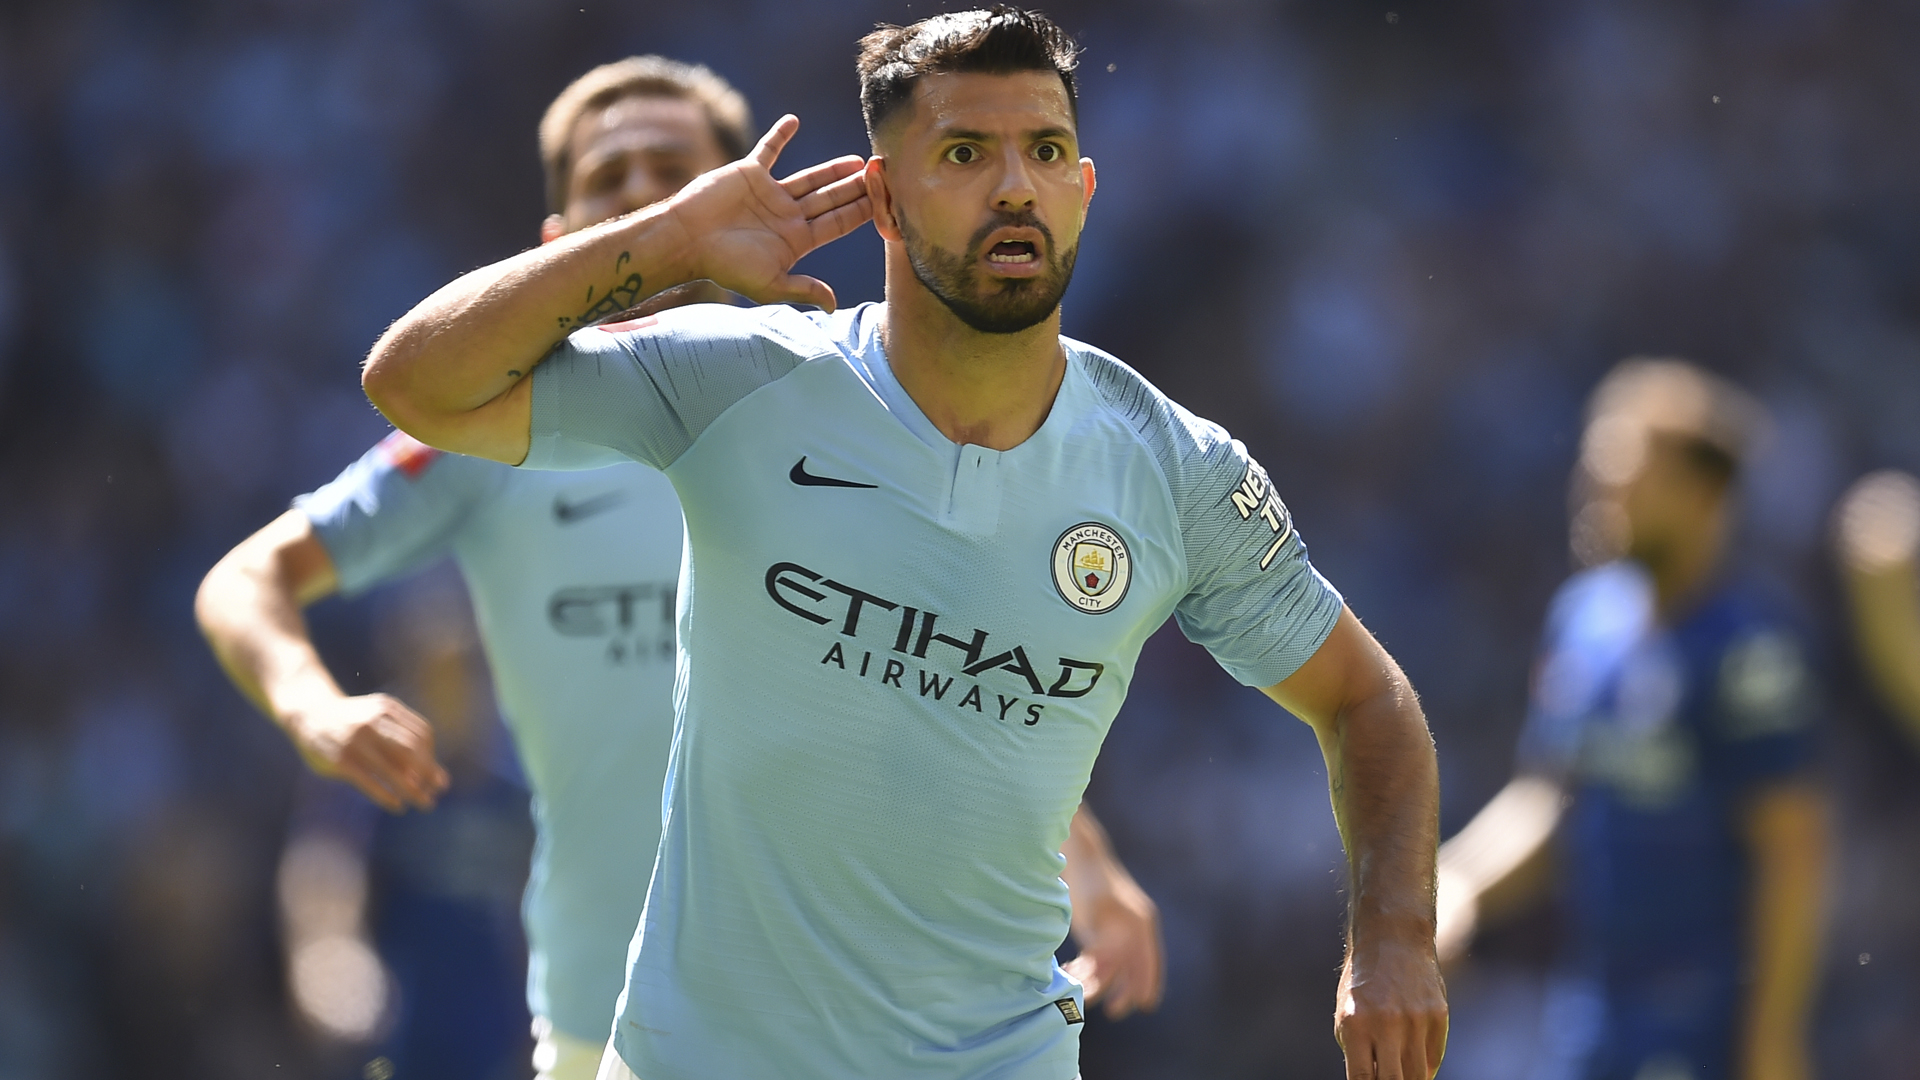 Two goals from Agüero give Manchester City the first title of the season